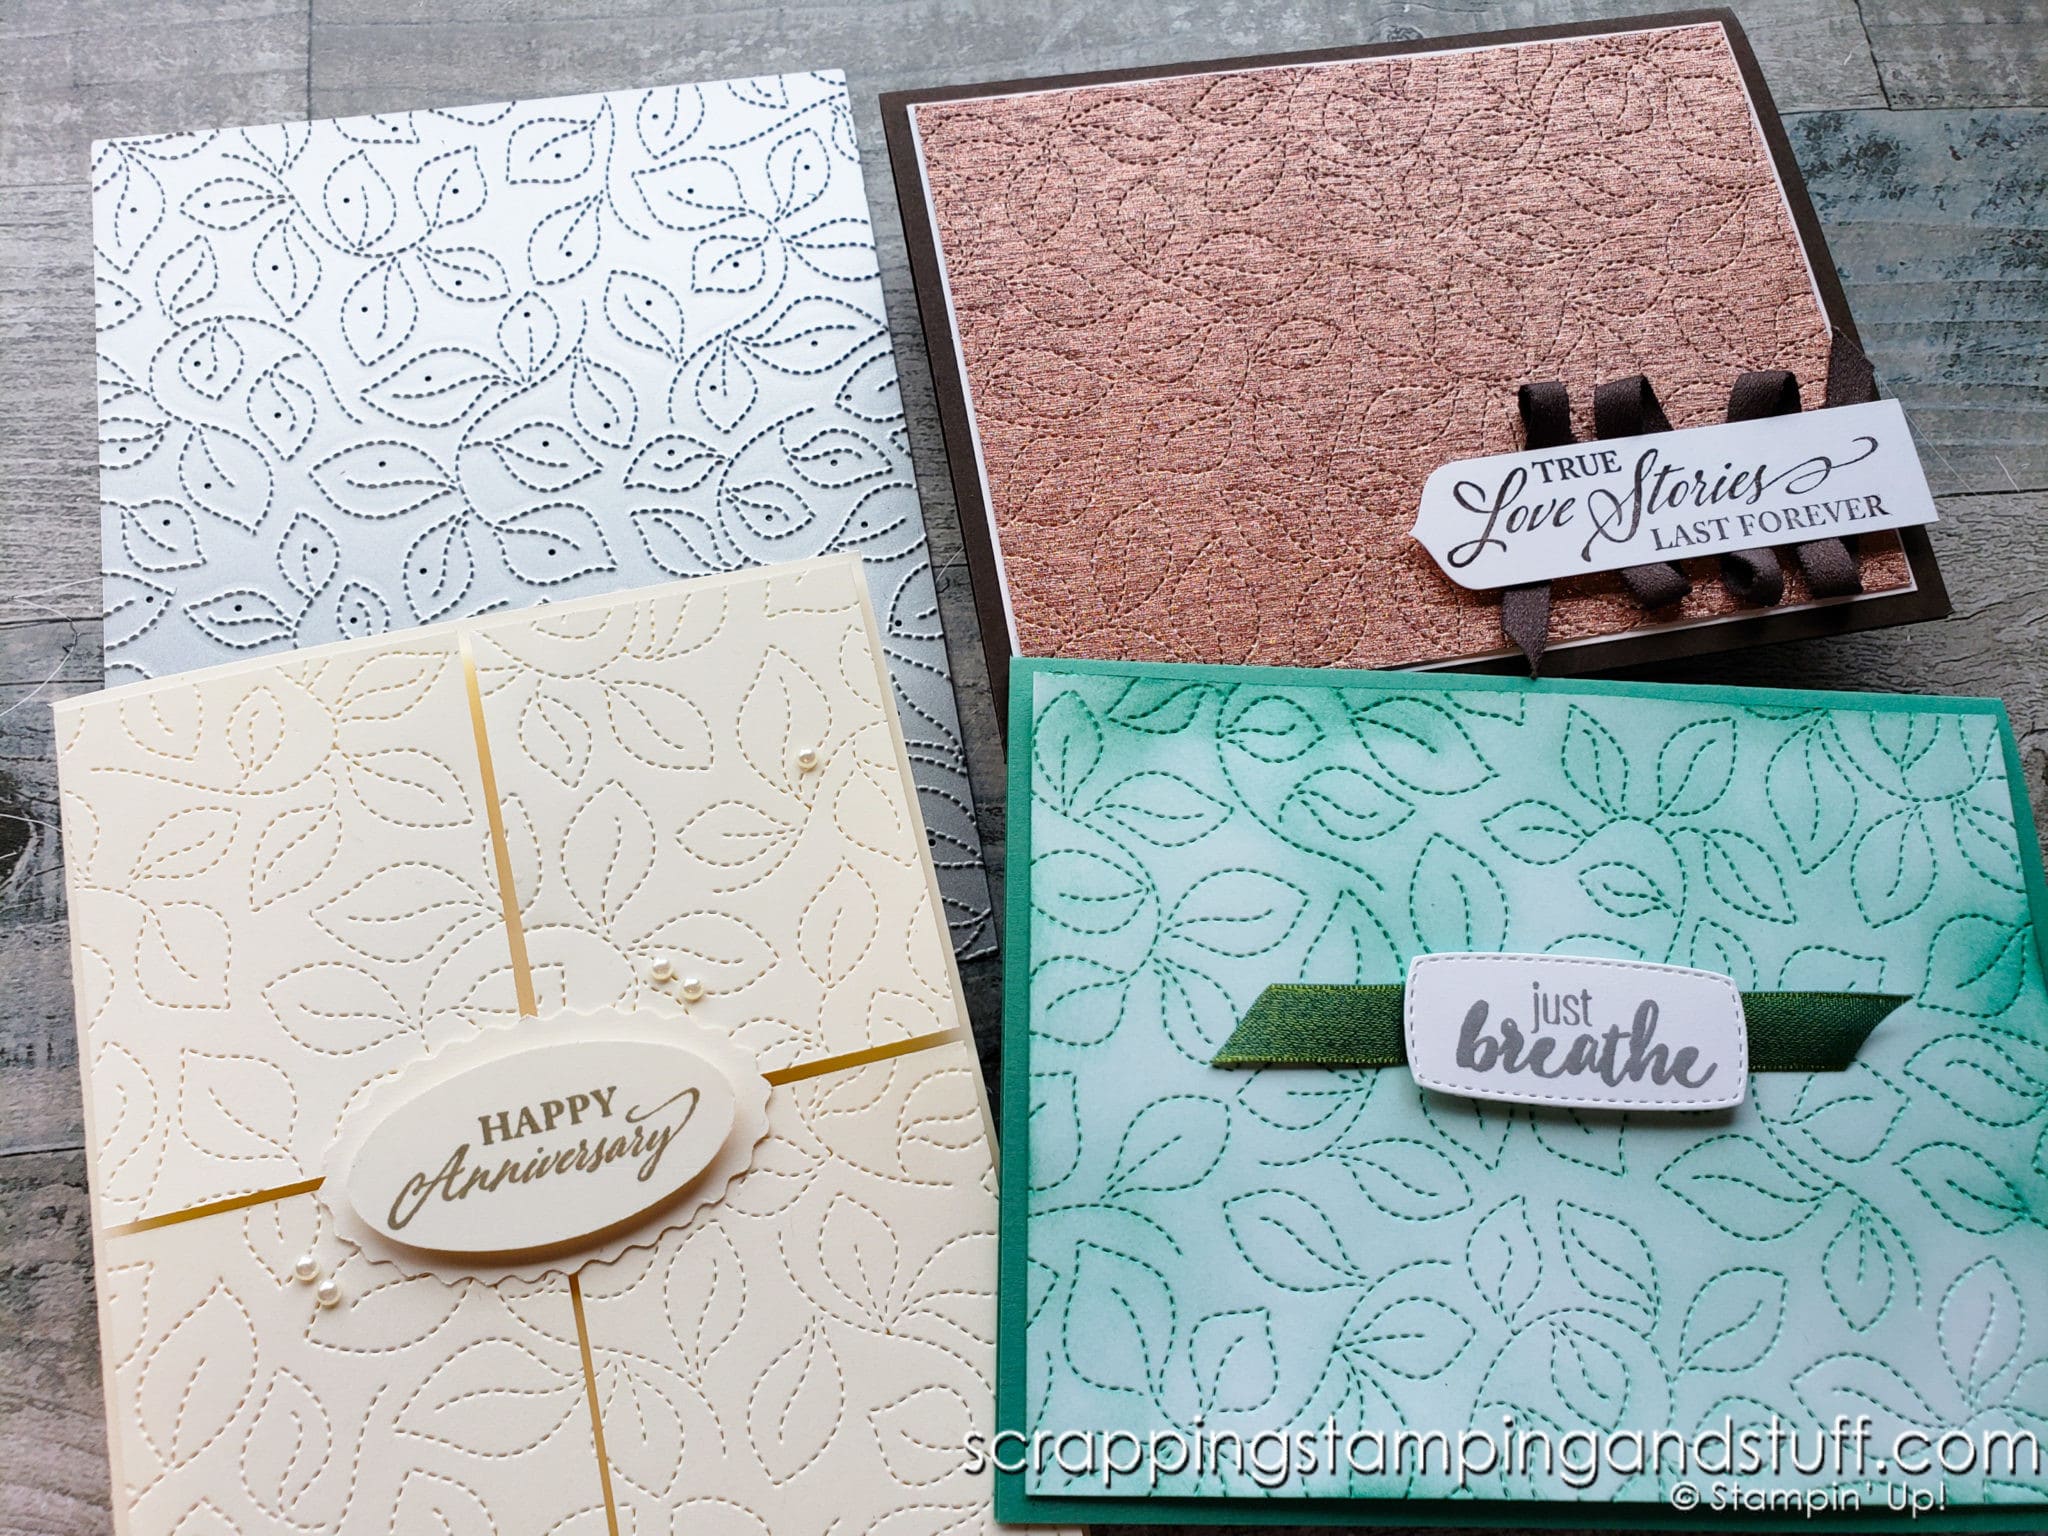 Use The Stampin Up Stitched Greenery Die For Gorgeous Backgrounds